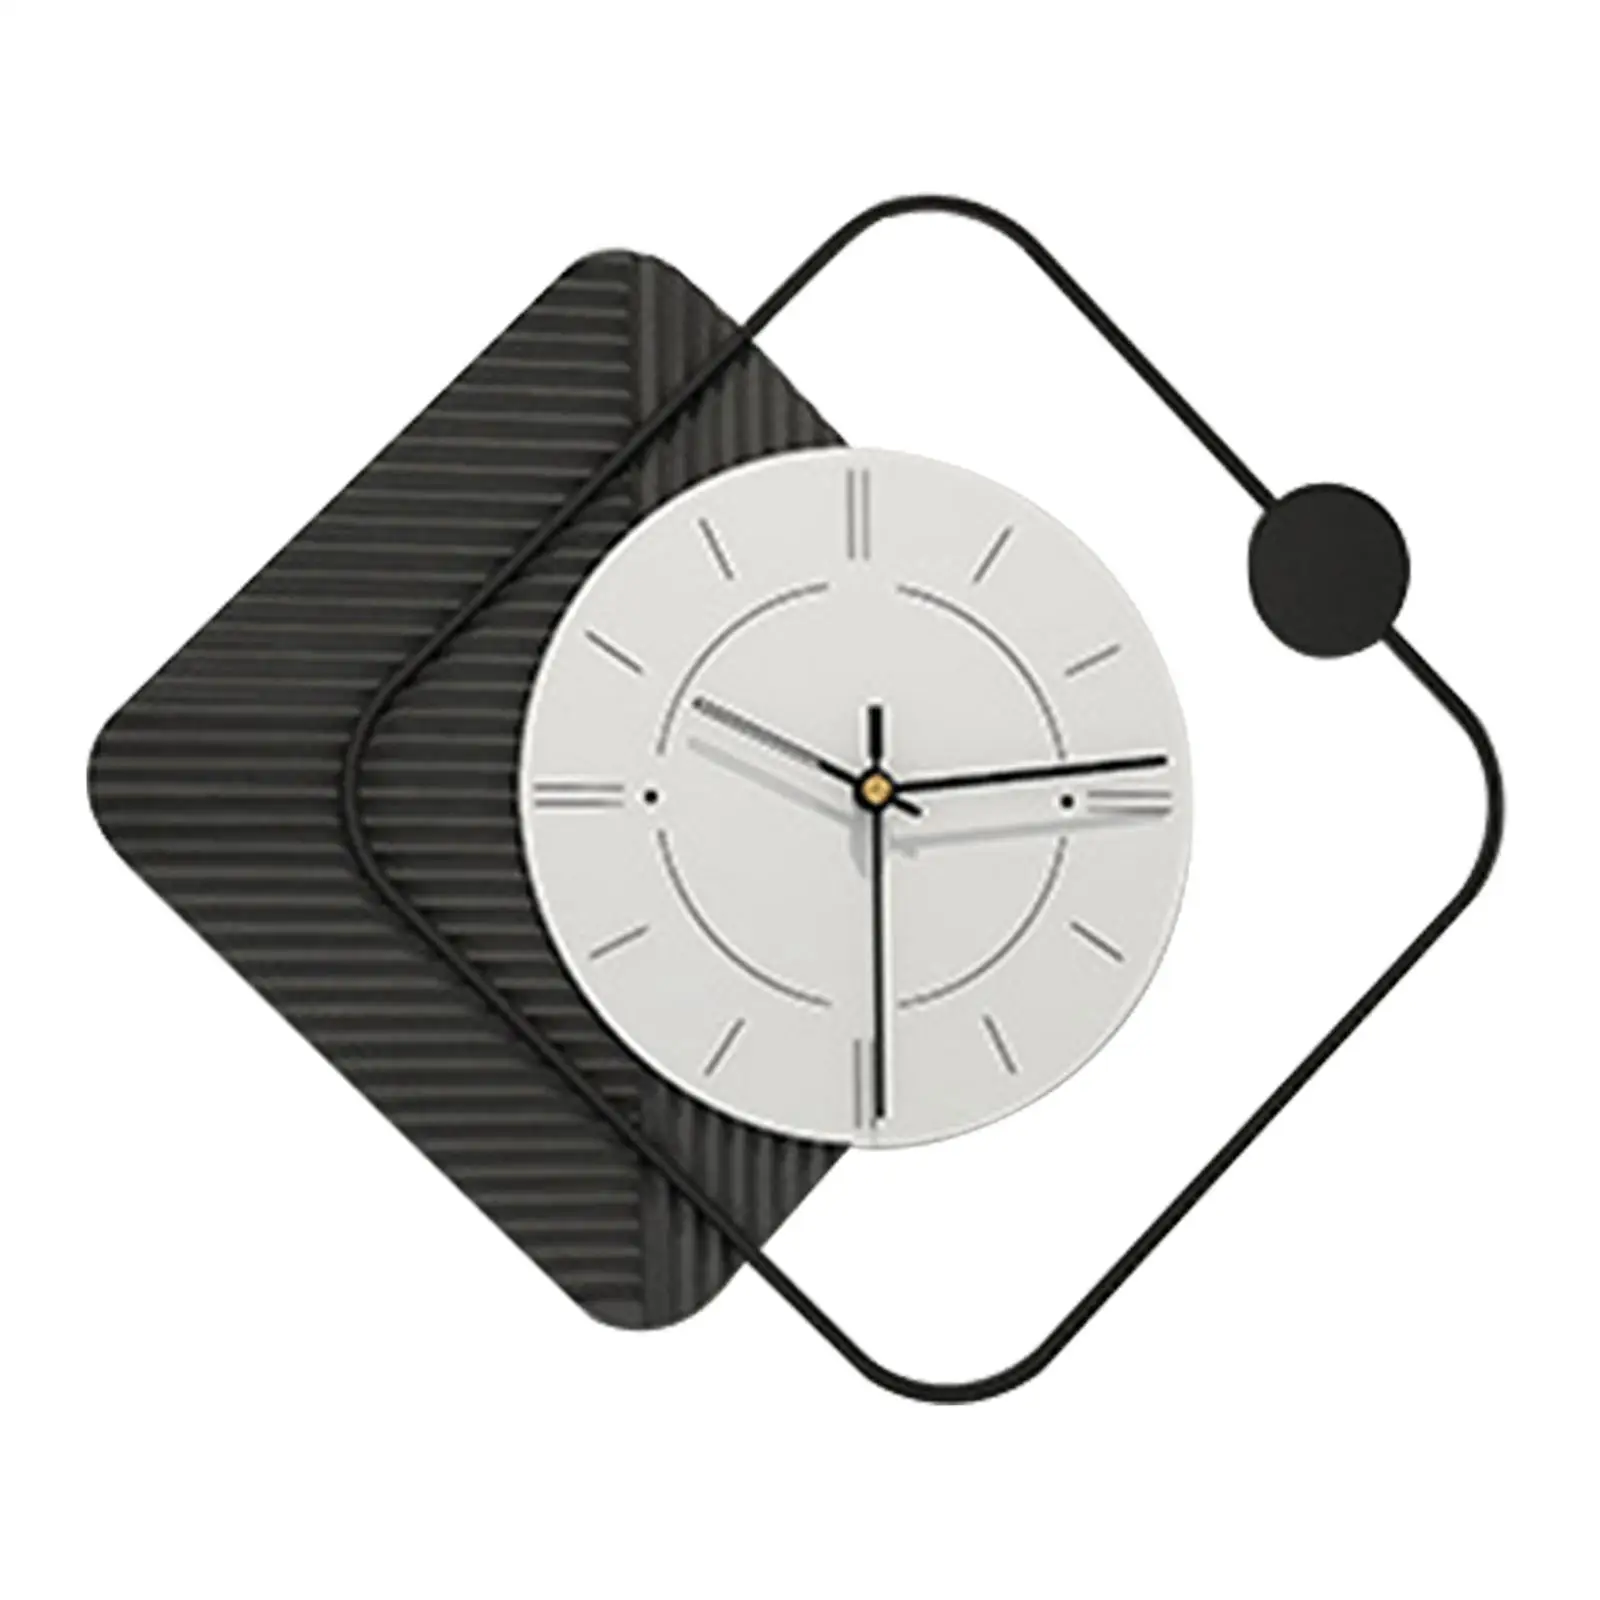 Modern Acrylic Wall Clock Silent Hanging Battery Operated Decorative Clock for Apartment Living Room Dining Room Decor